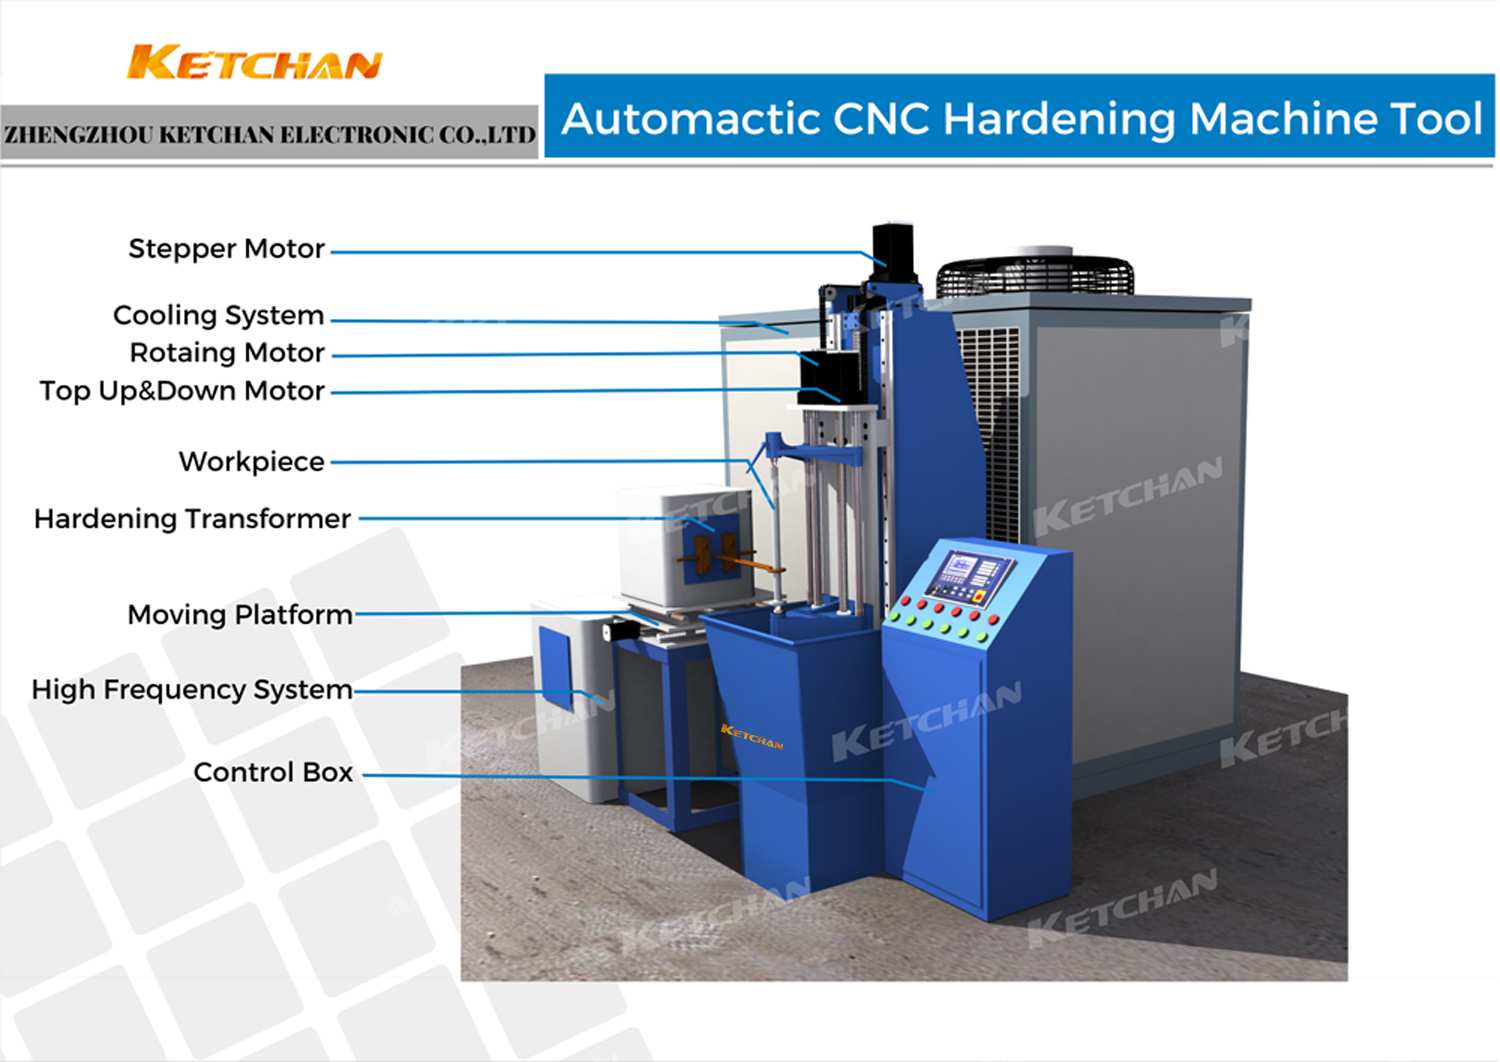 How to determine the parameters of induction hardening machine tools